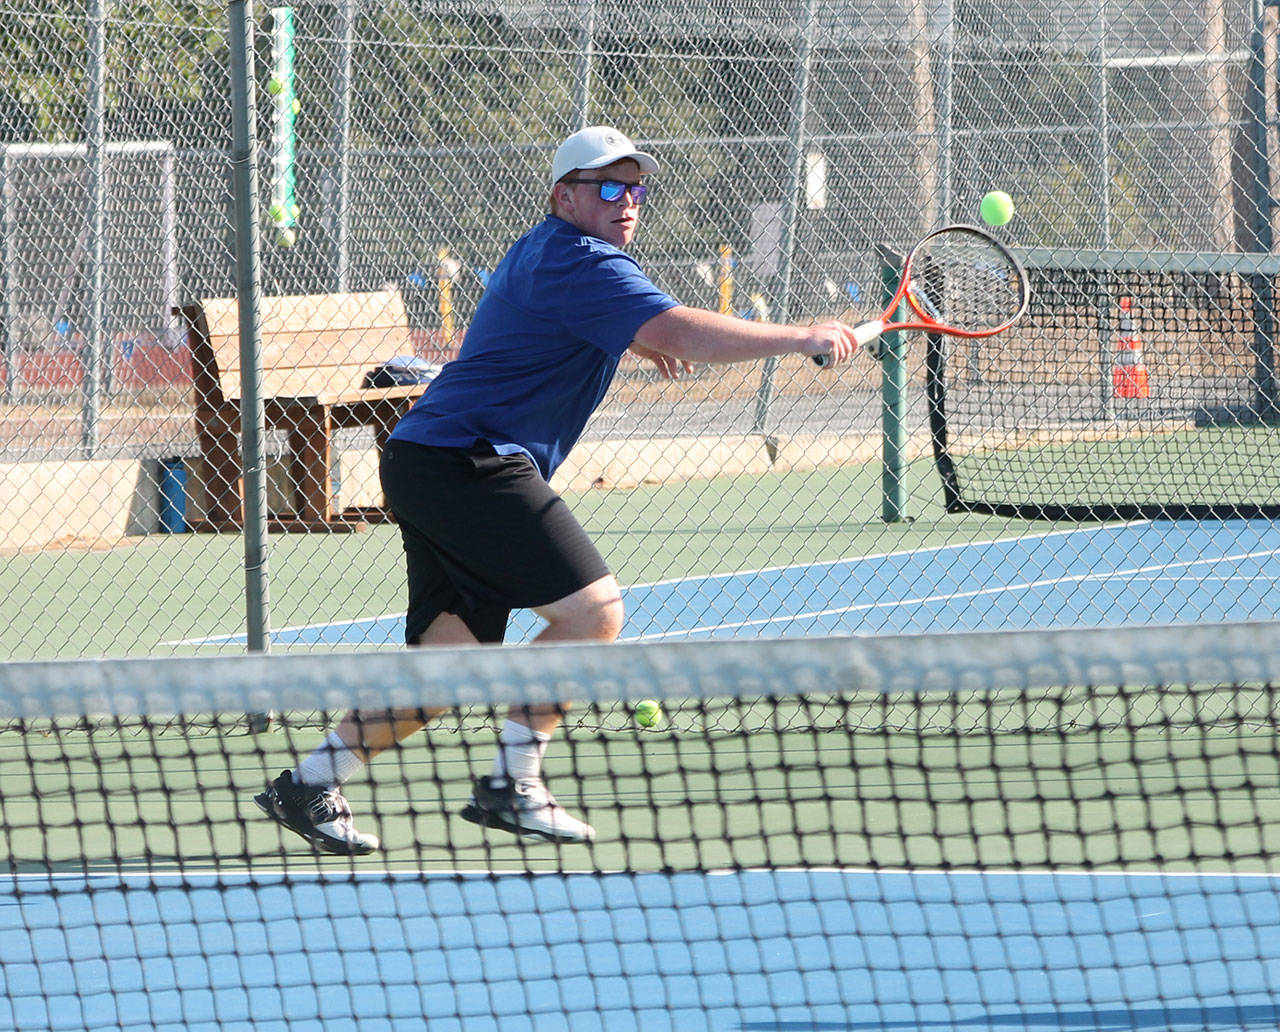 Brent de Wolf uses a backhand to return a shot in first doubles.(Photo by Jim Waller/South Whidbey Record)